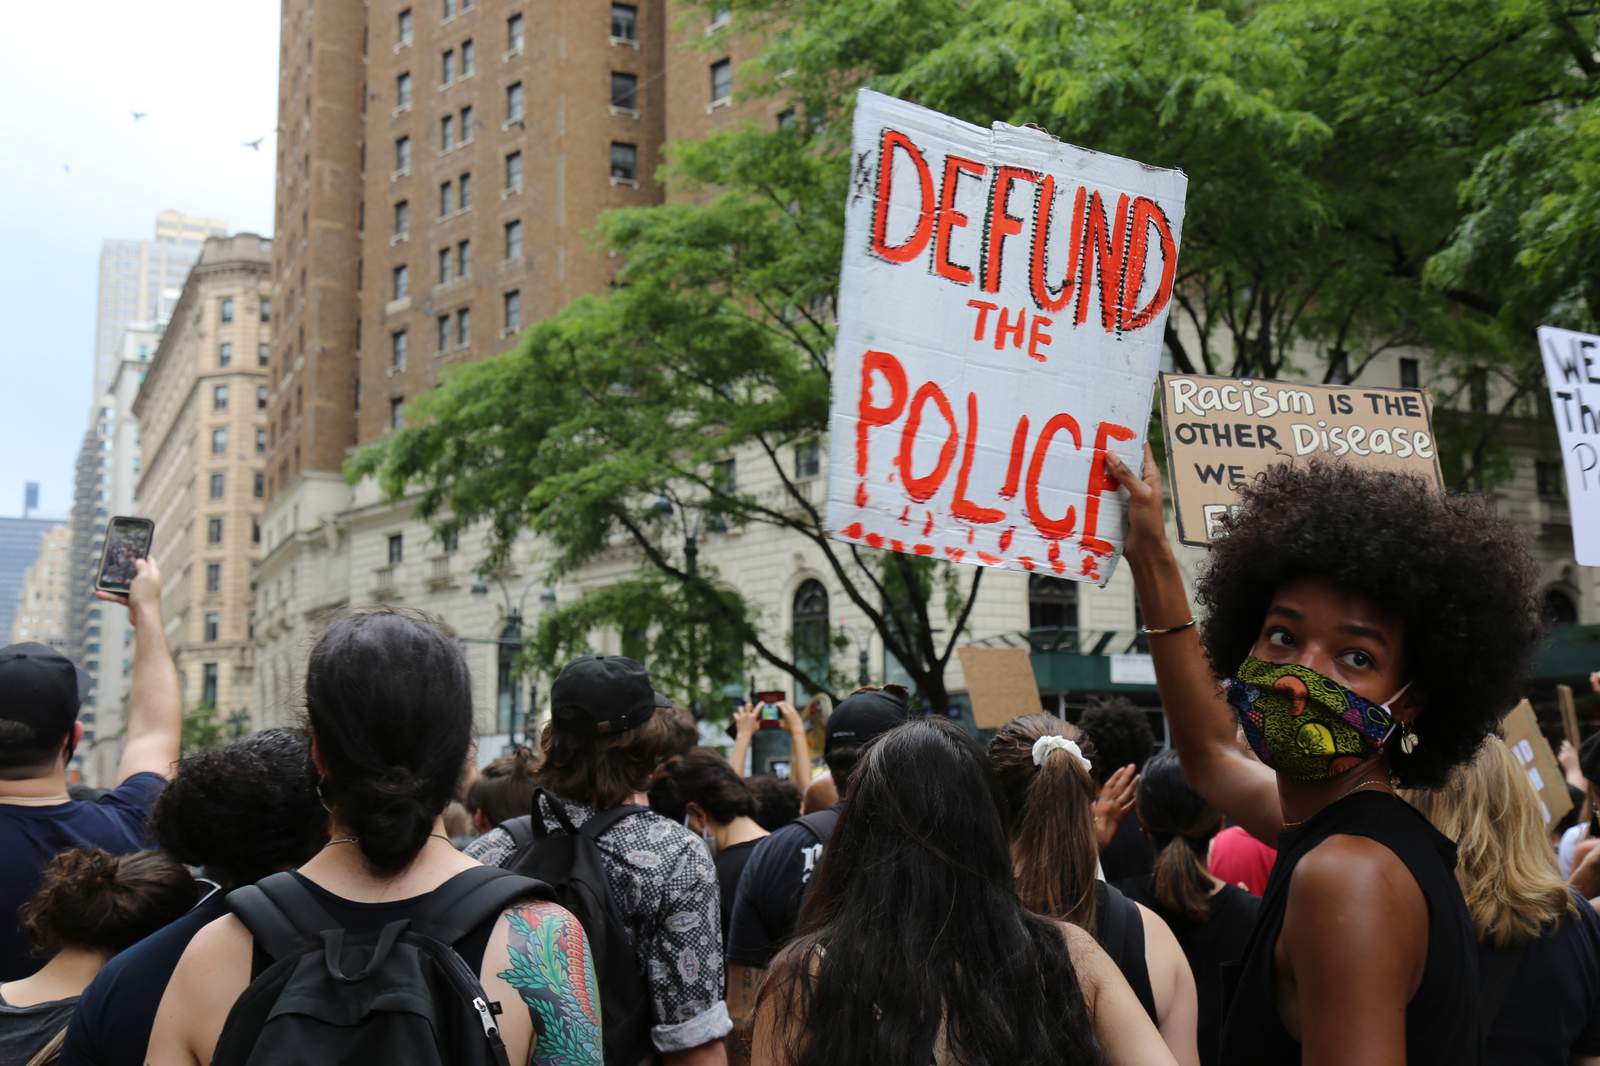 When protesters cry 'defund the police,' what does it mean?